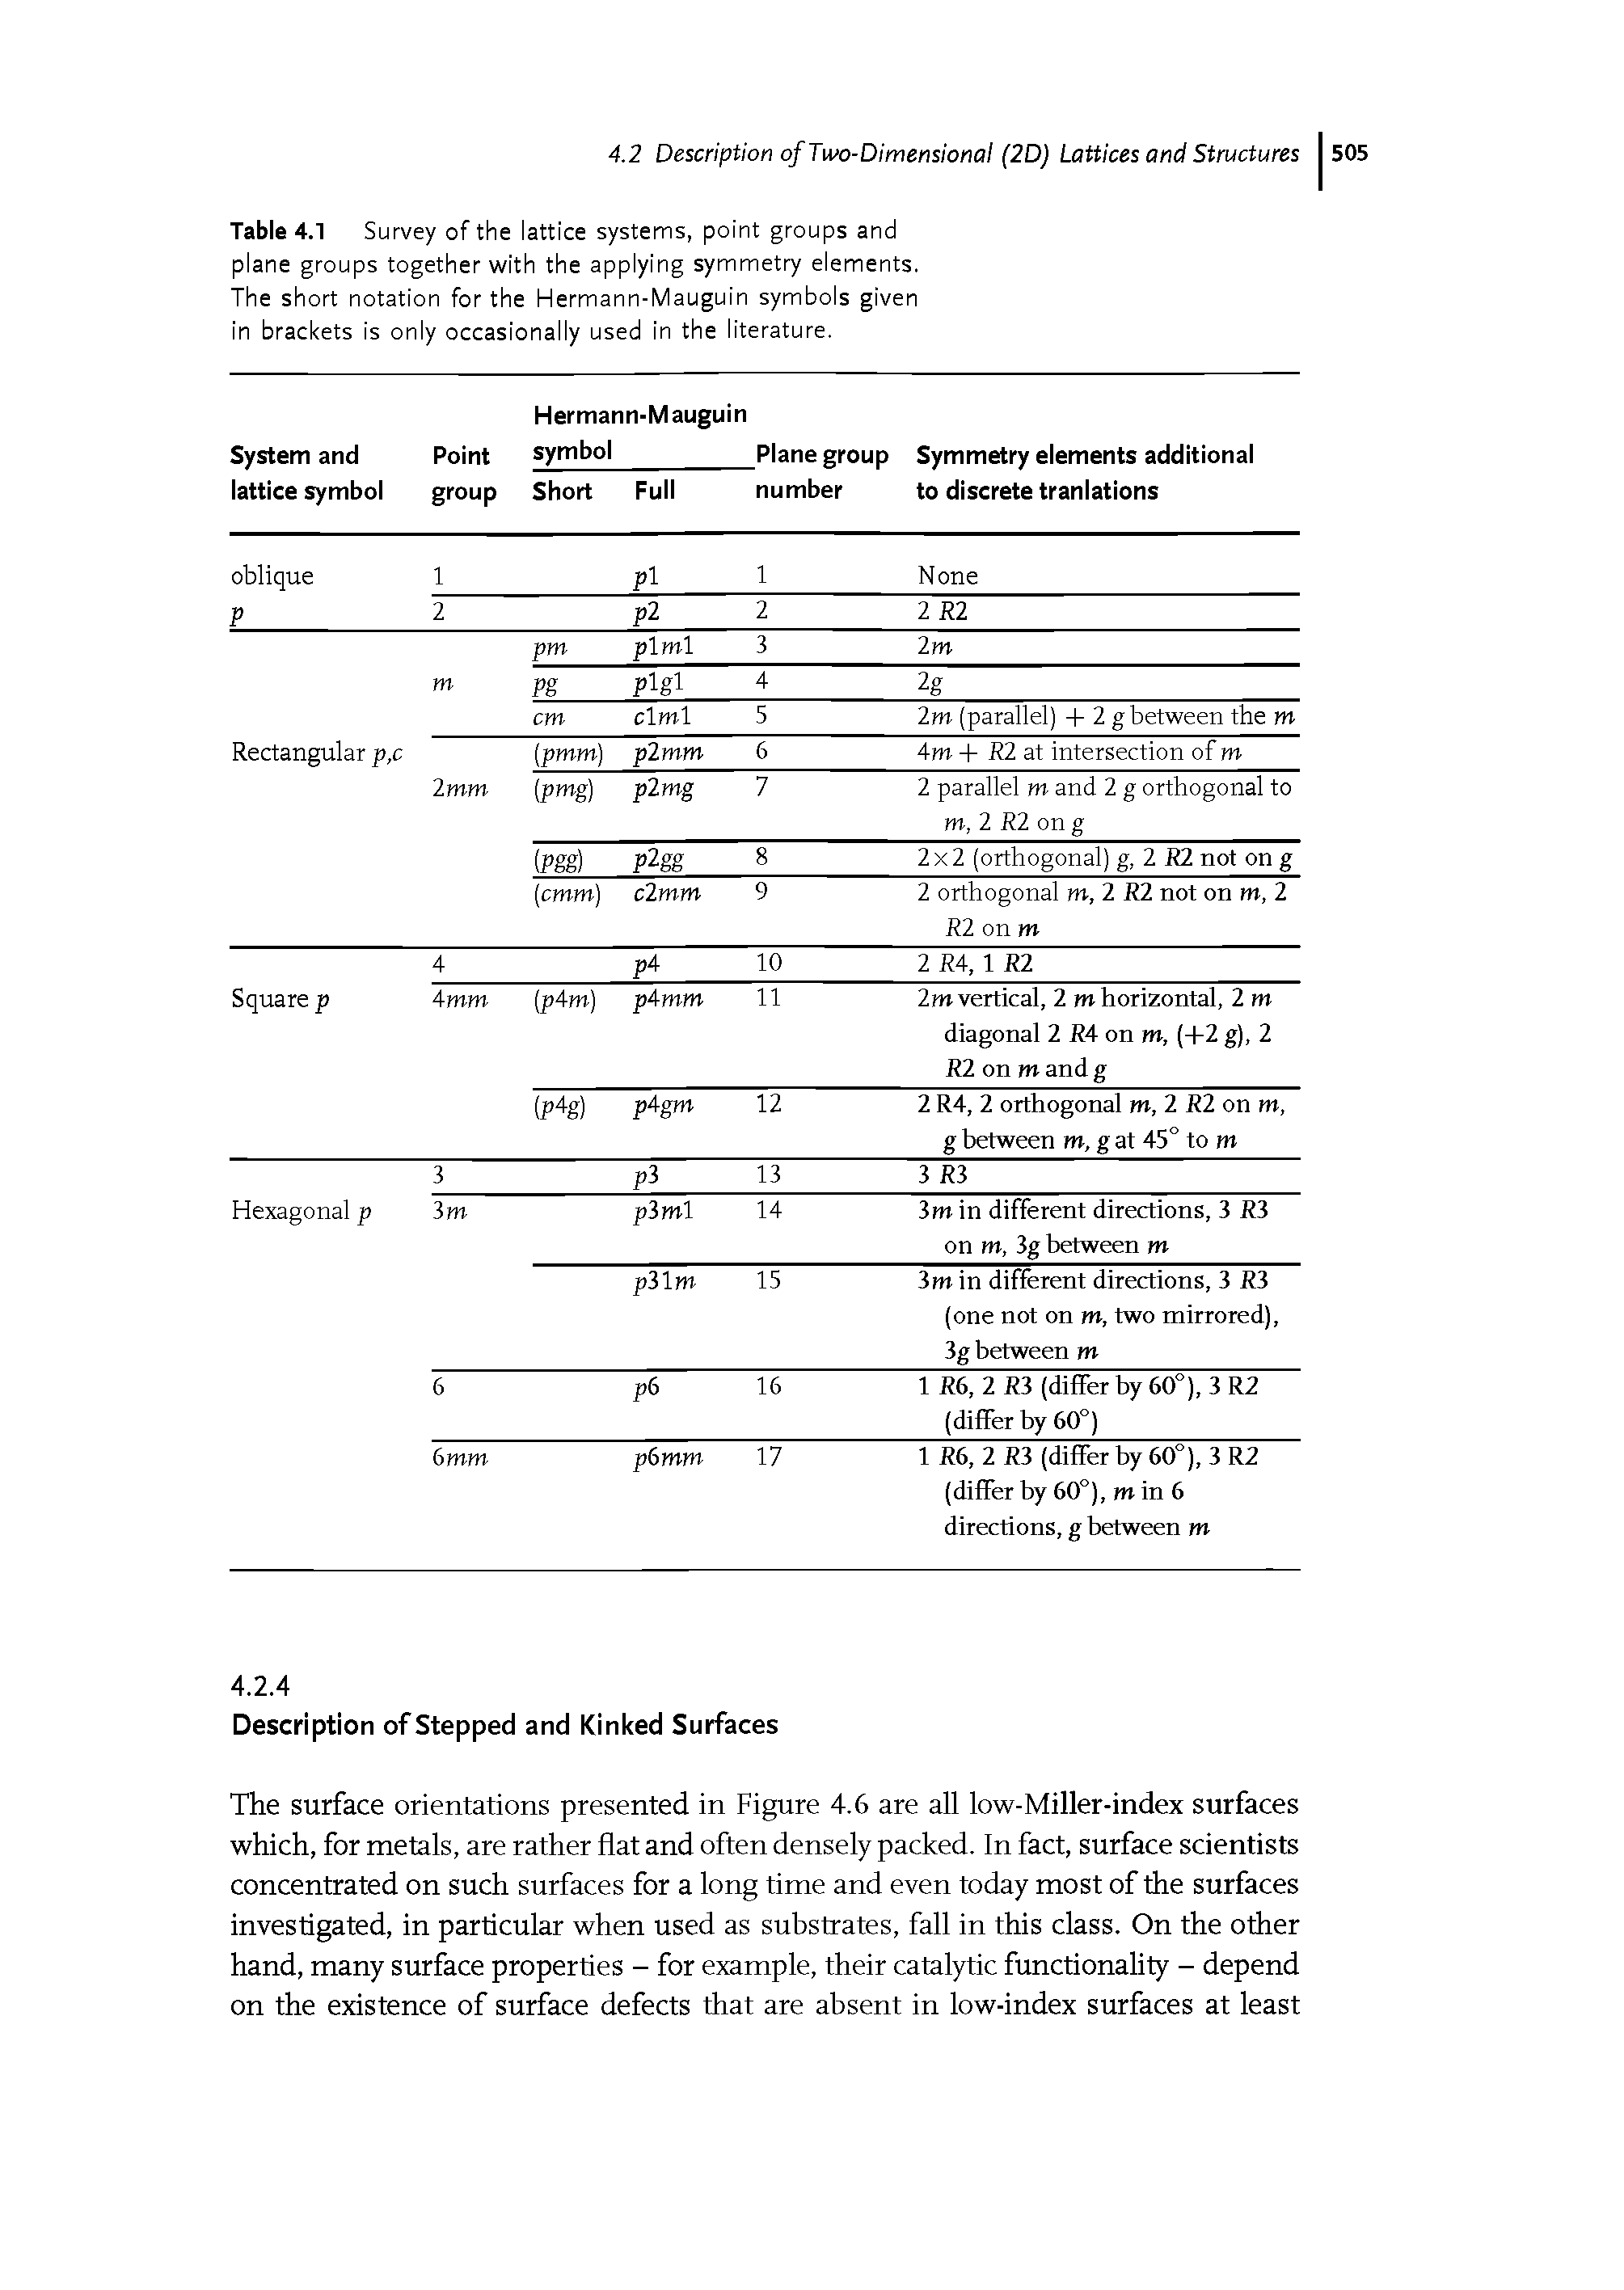 Table 4.1 Survey of the lattice systems, point groups and plane groups together with the applying symmetry elements. The short notation for the Hermann-Mauguin symbols given in brackets is only occasionally used in the literature.